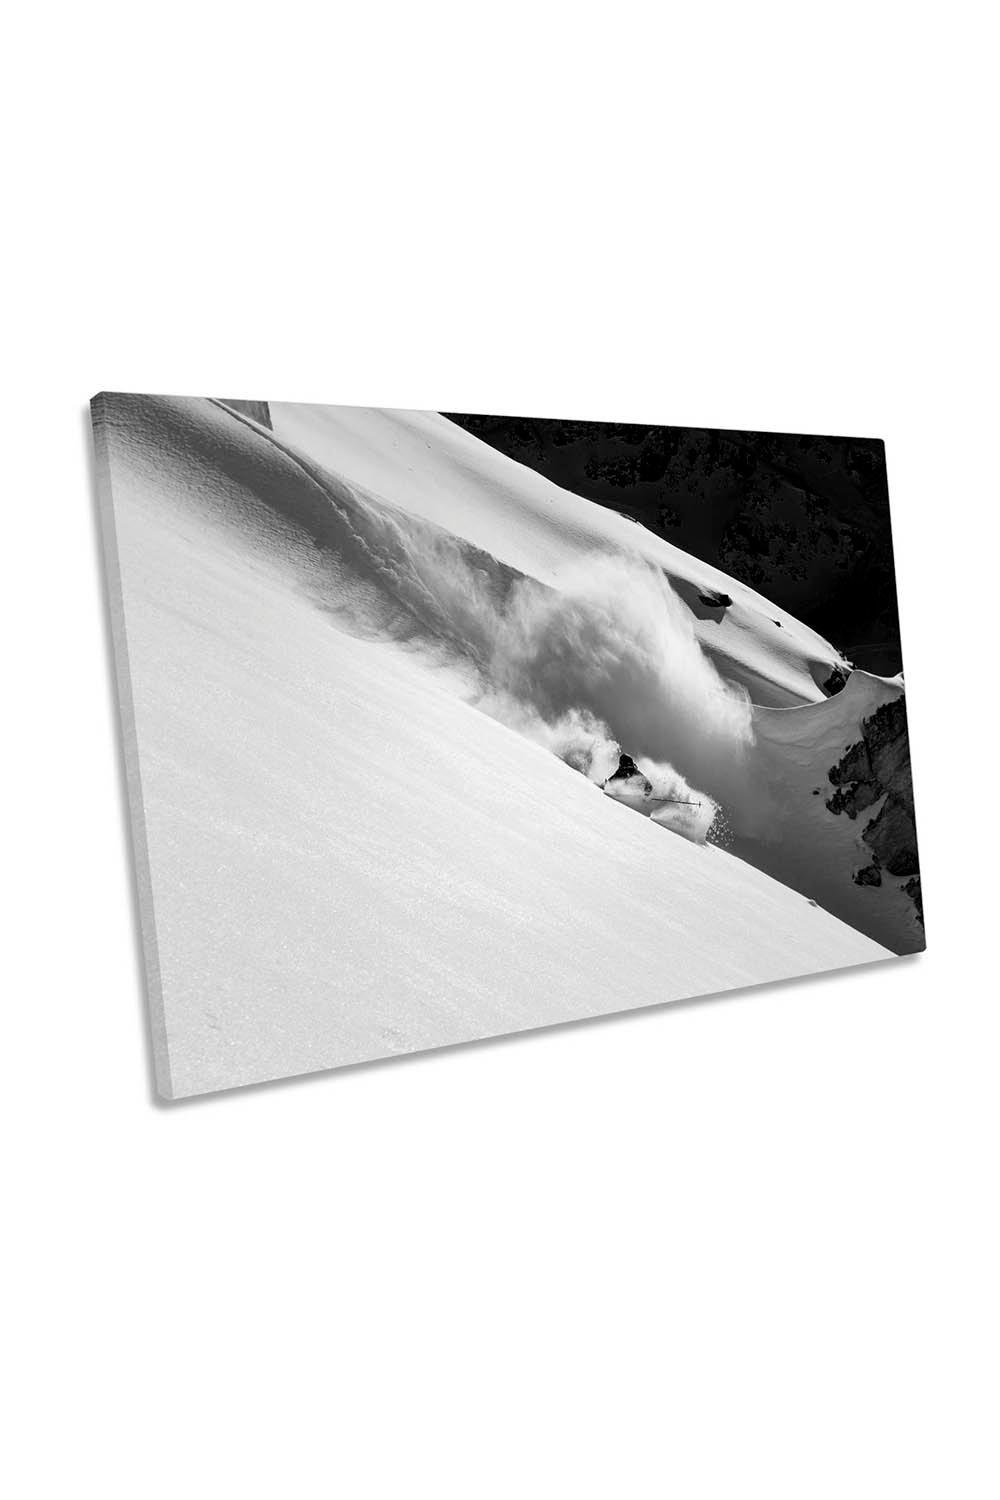 Cloud of Snow Skiing Skier Sports Canvas Wall Art Picture Print